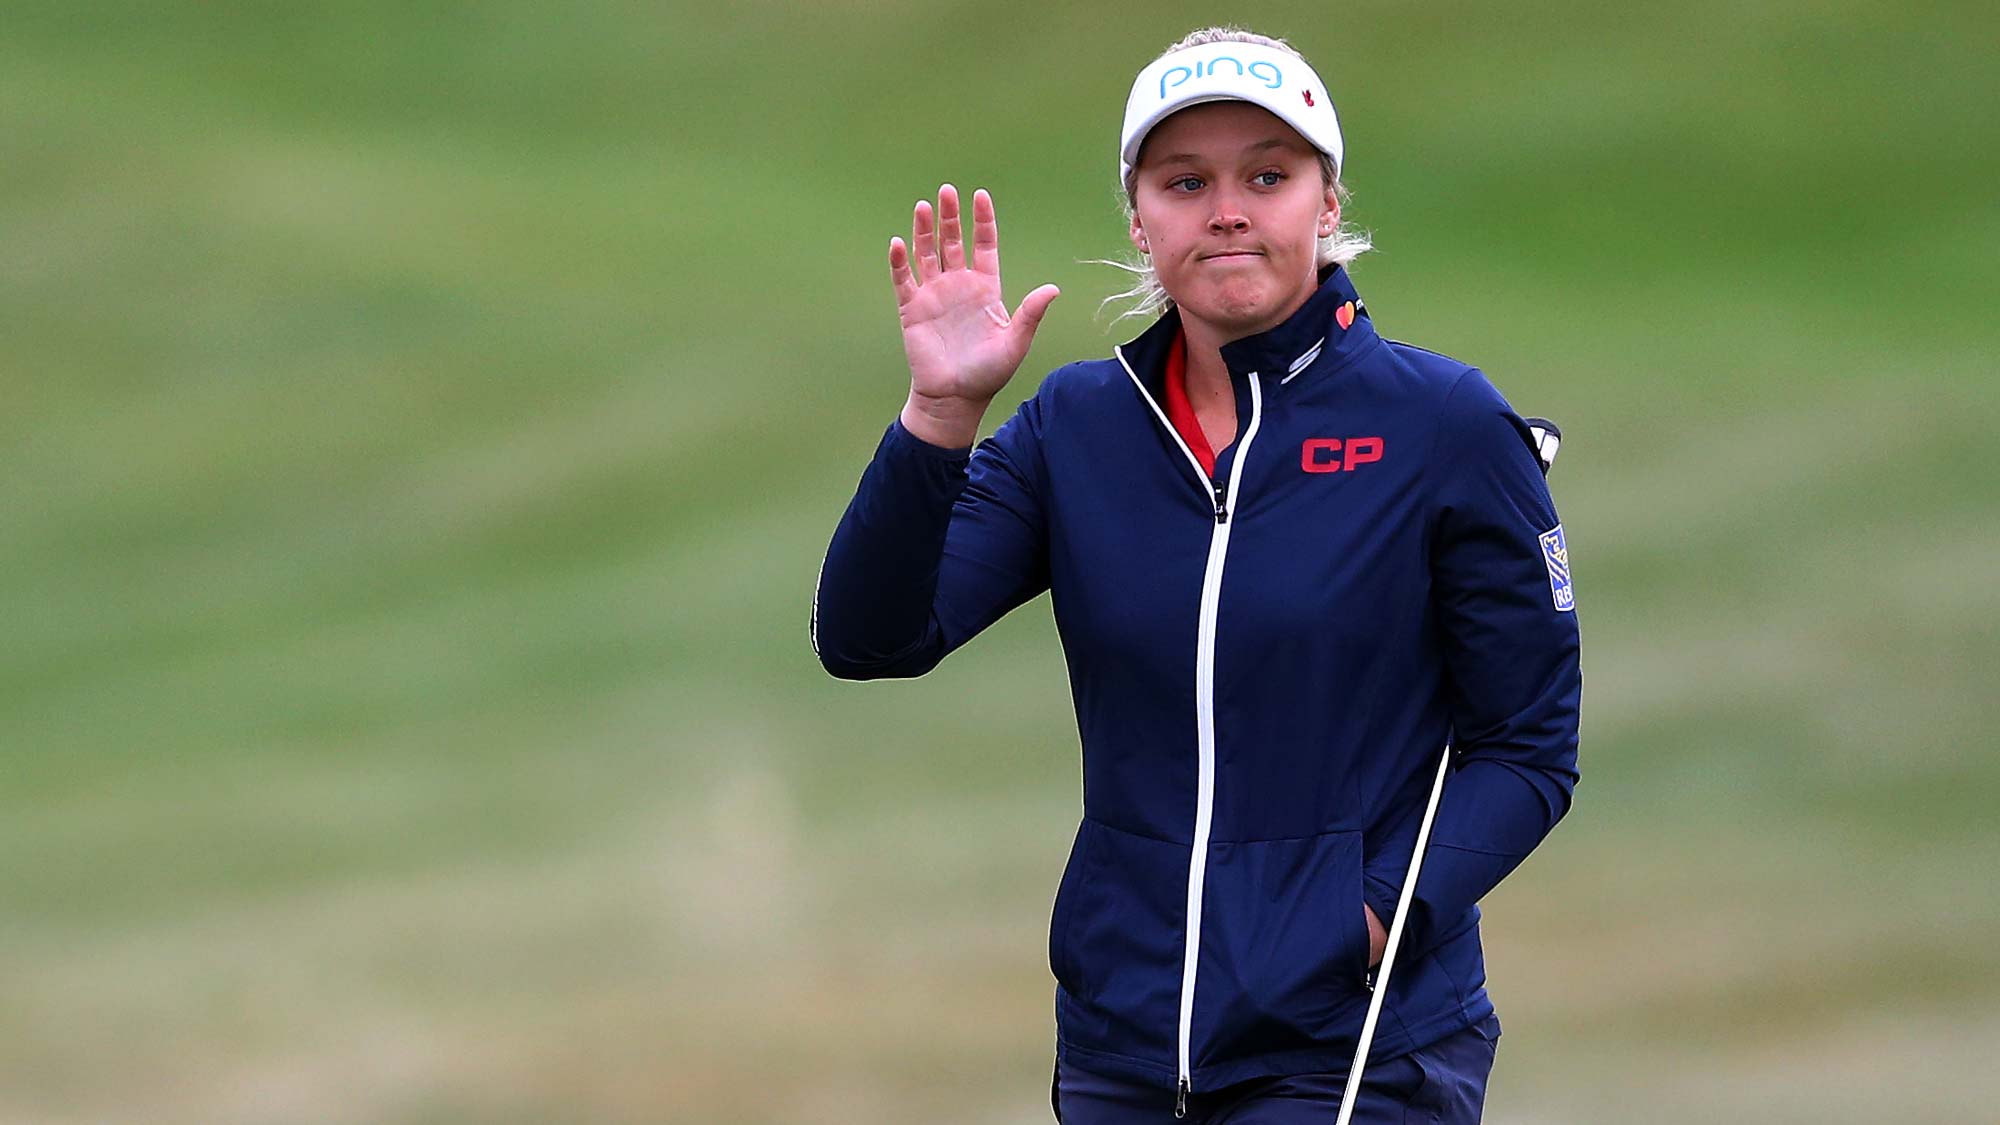 Brooke Henderson of Canada waves to the crowd on the 1st green during the final round of the CP Womens Open